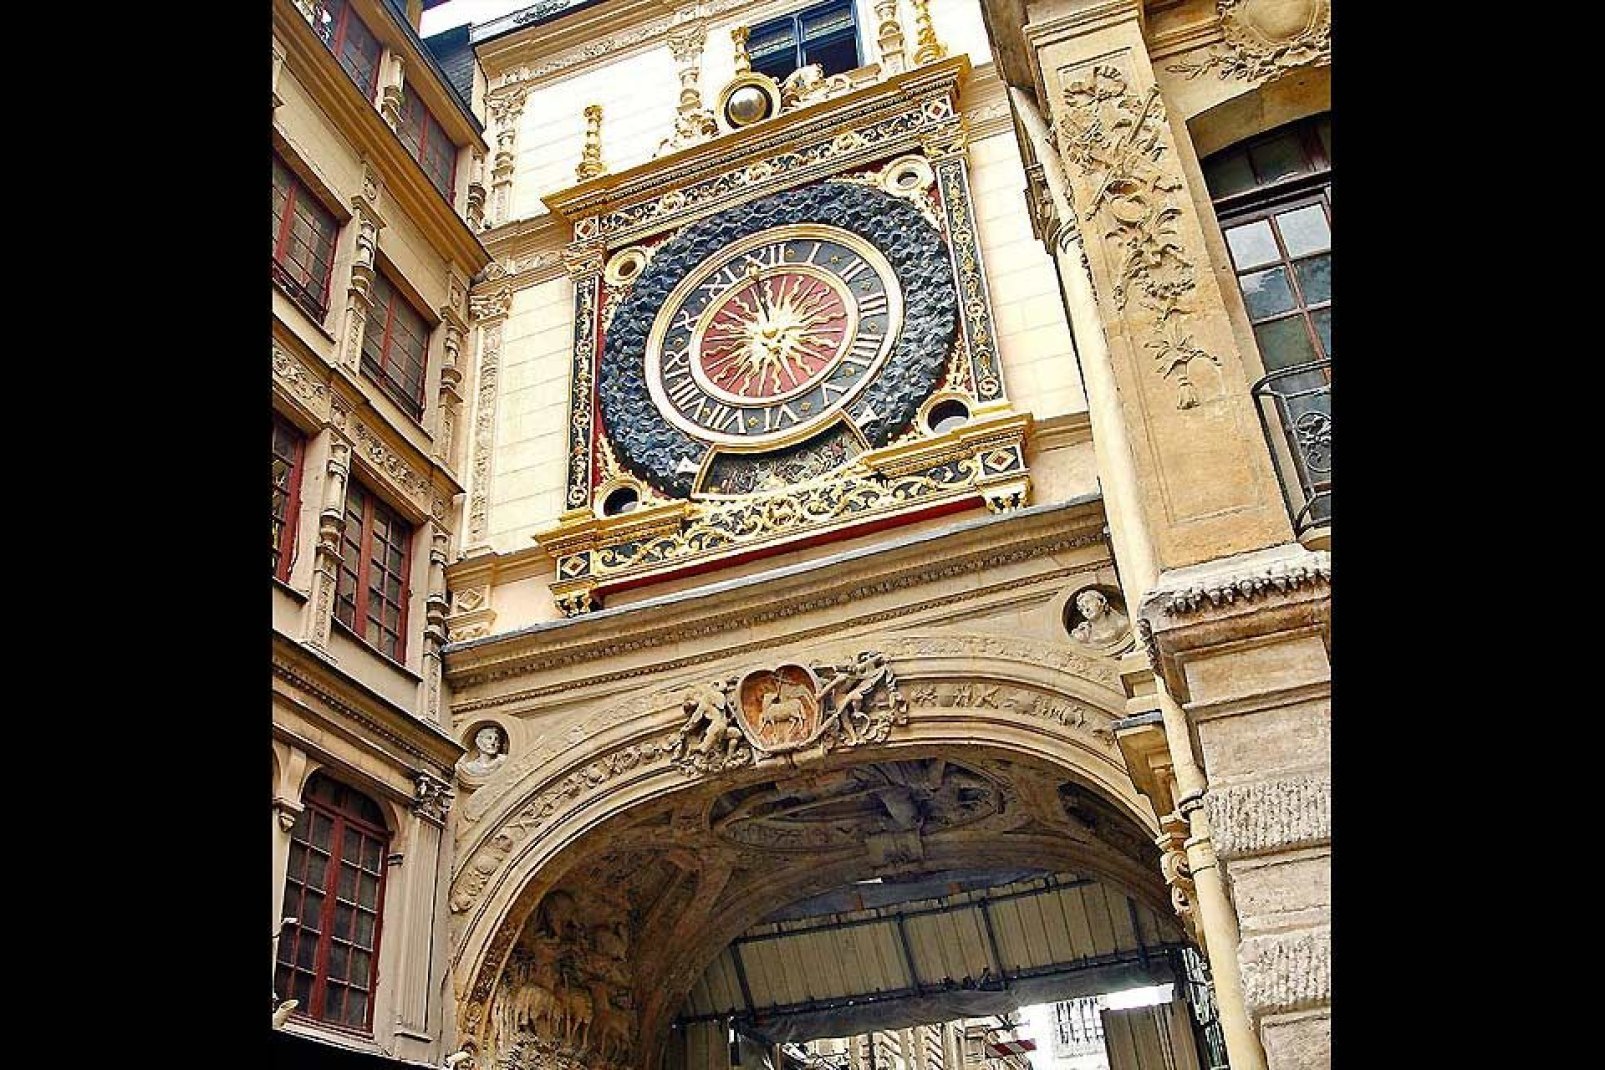 The Great Clock's movement was created in 1389, which makes it one of the oldest mechanisms in France.